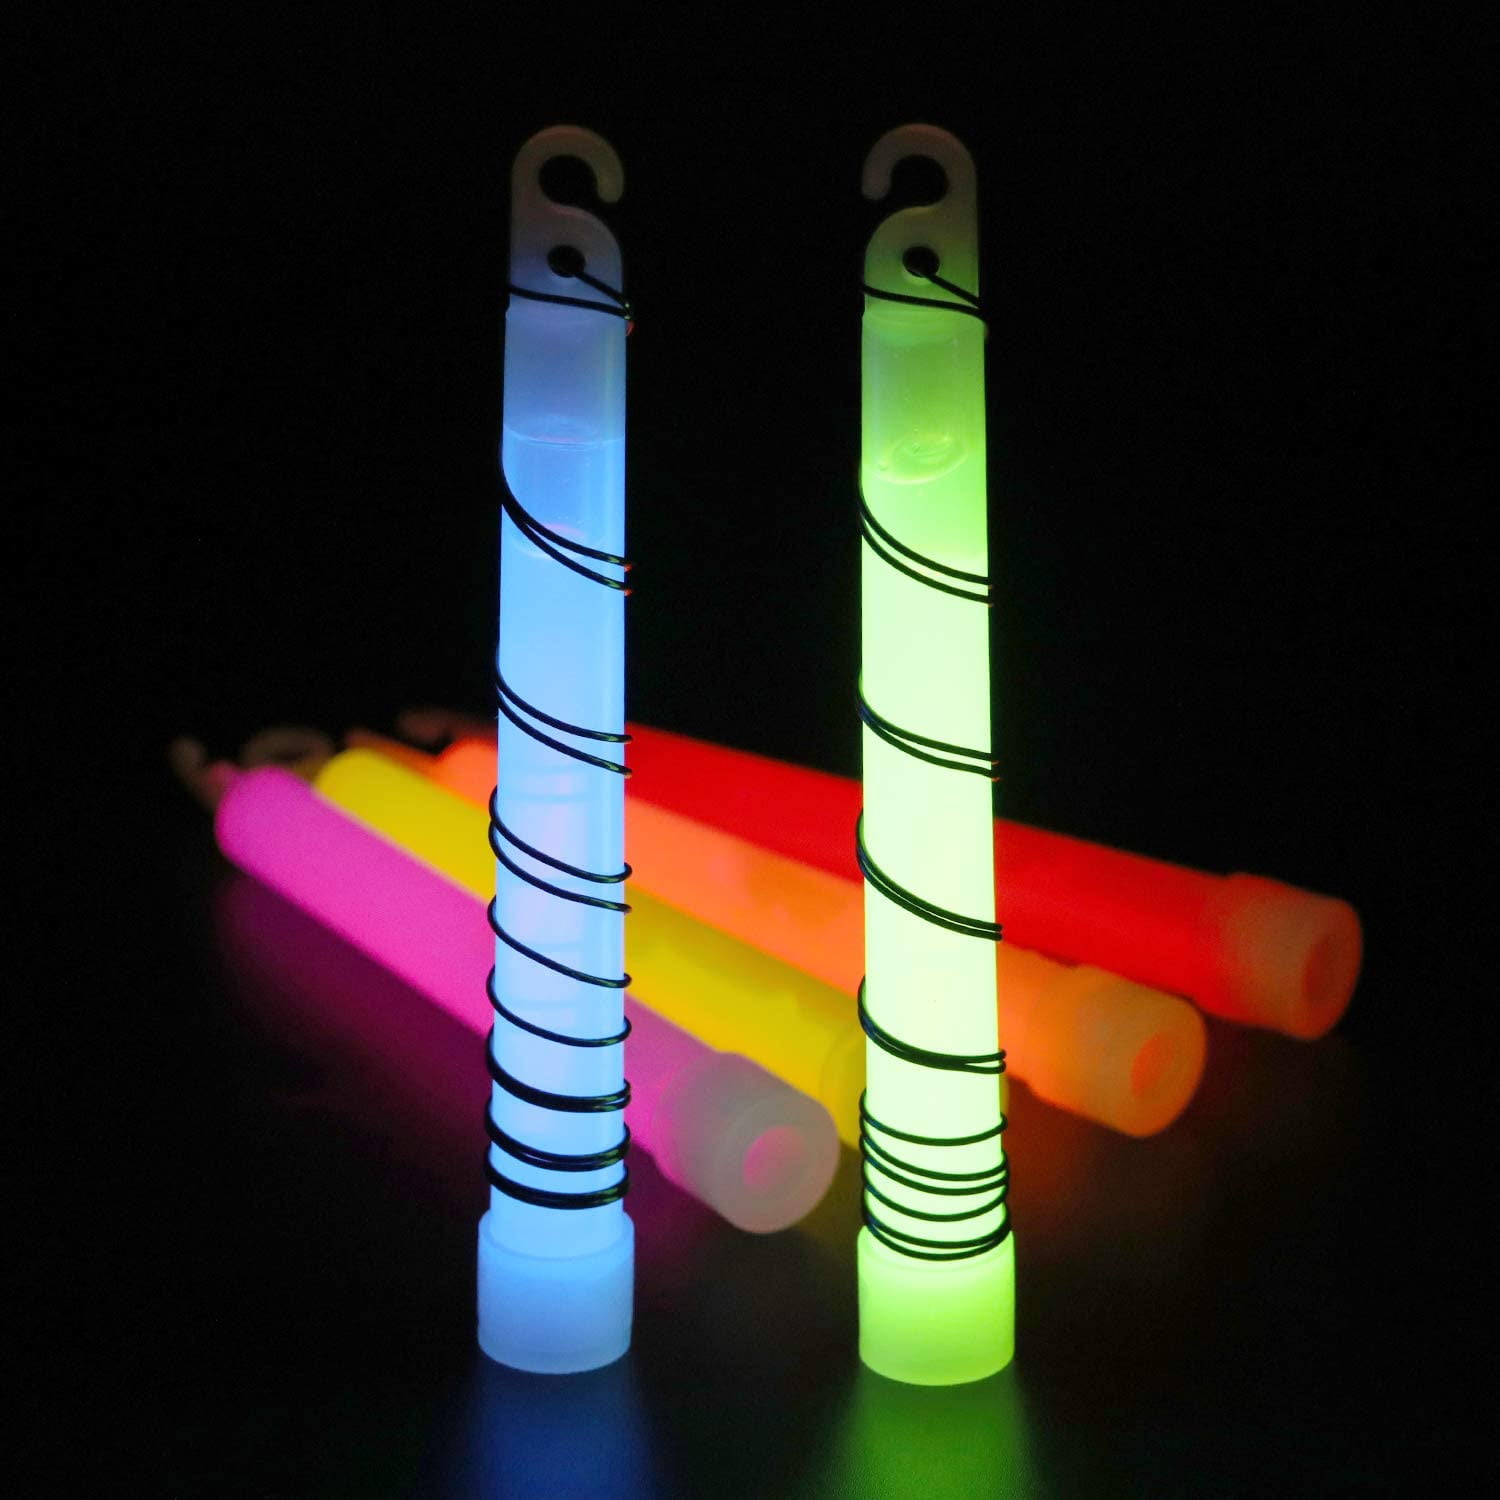 Trimming Shop Premium Glow Sticks with Connectors to Make Neon Necklace Wrist Band Bracelets, Mixed Color Light Sticks for Kids Party Supplies